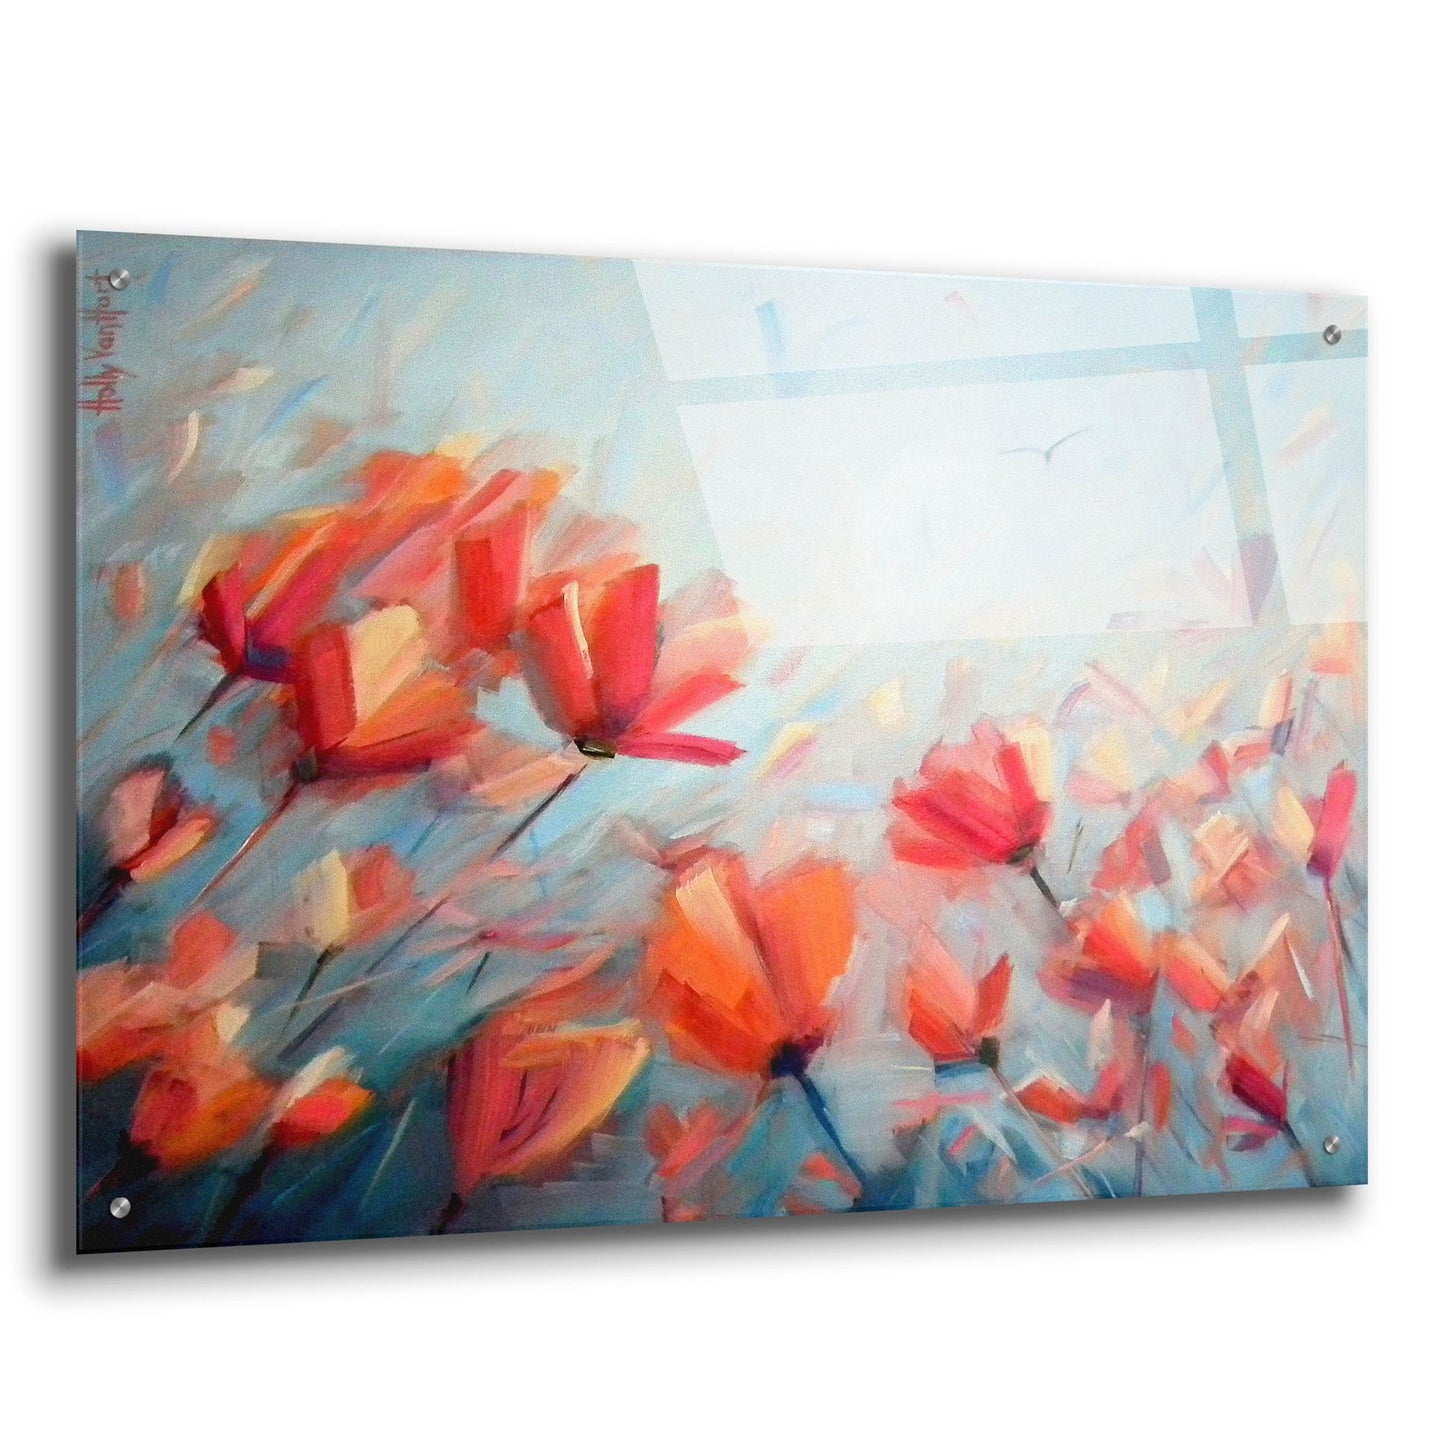 Epic Art 'Dreaming In Full Color' by Holly Van Hart, Acrylic Glass Wall Art,36x24